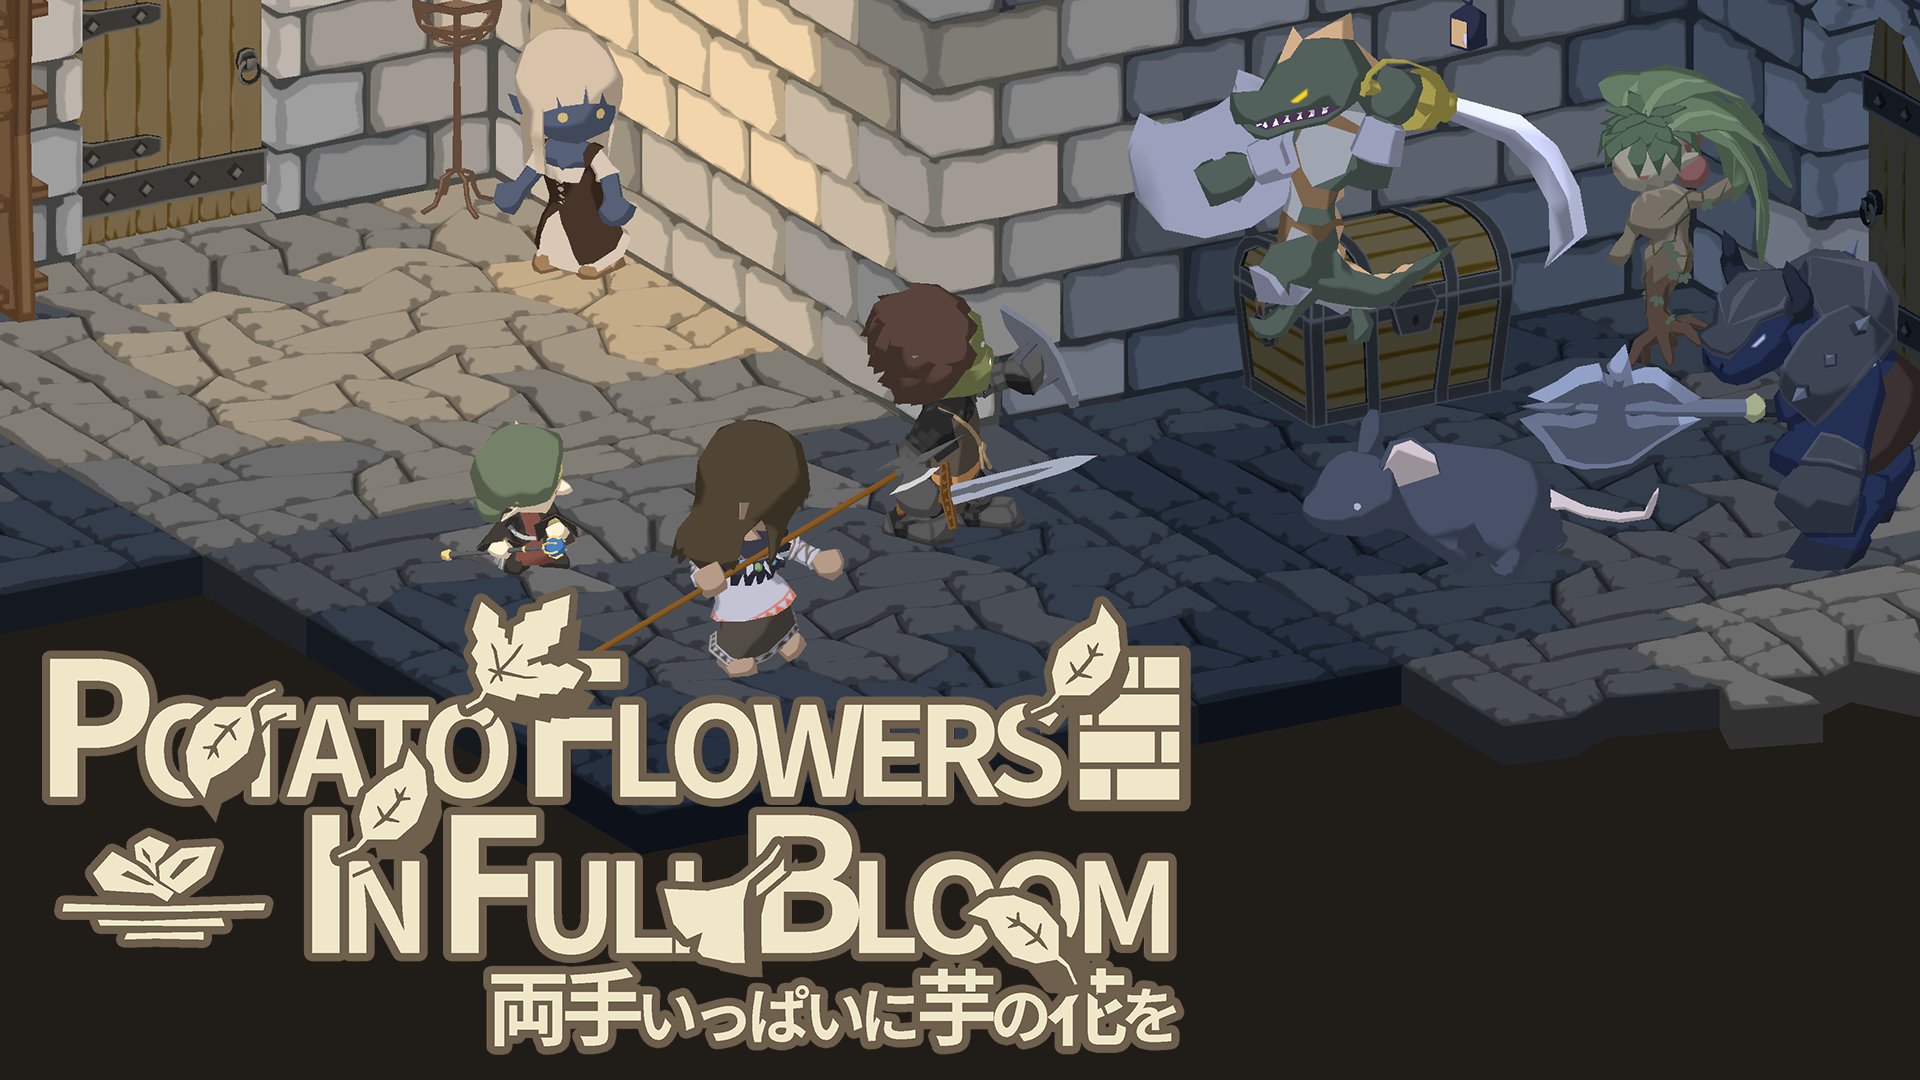 3D Dungeon Crawler RPG Potato Flowers in Full Bloom releasing March 10th on Nintendo Switch and Steam! Demo available today!